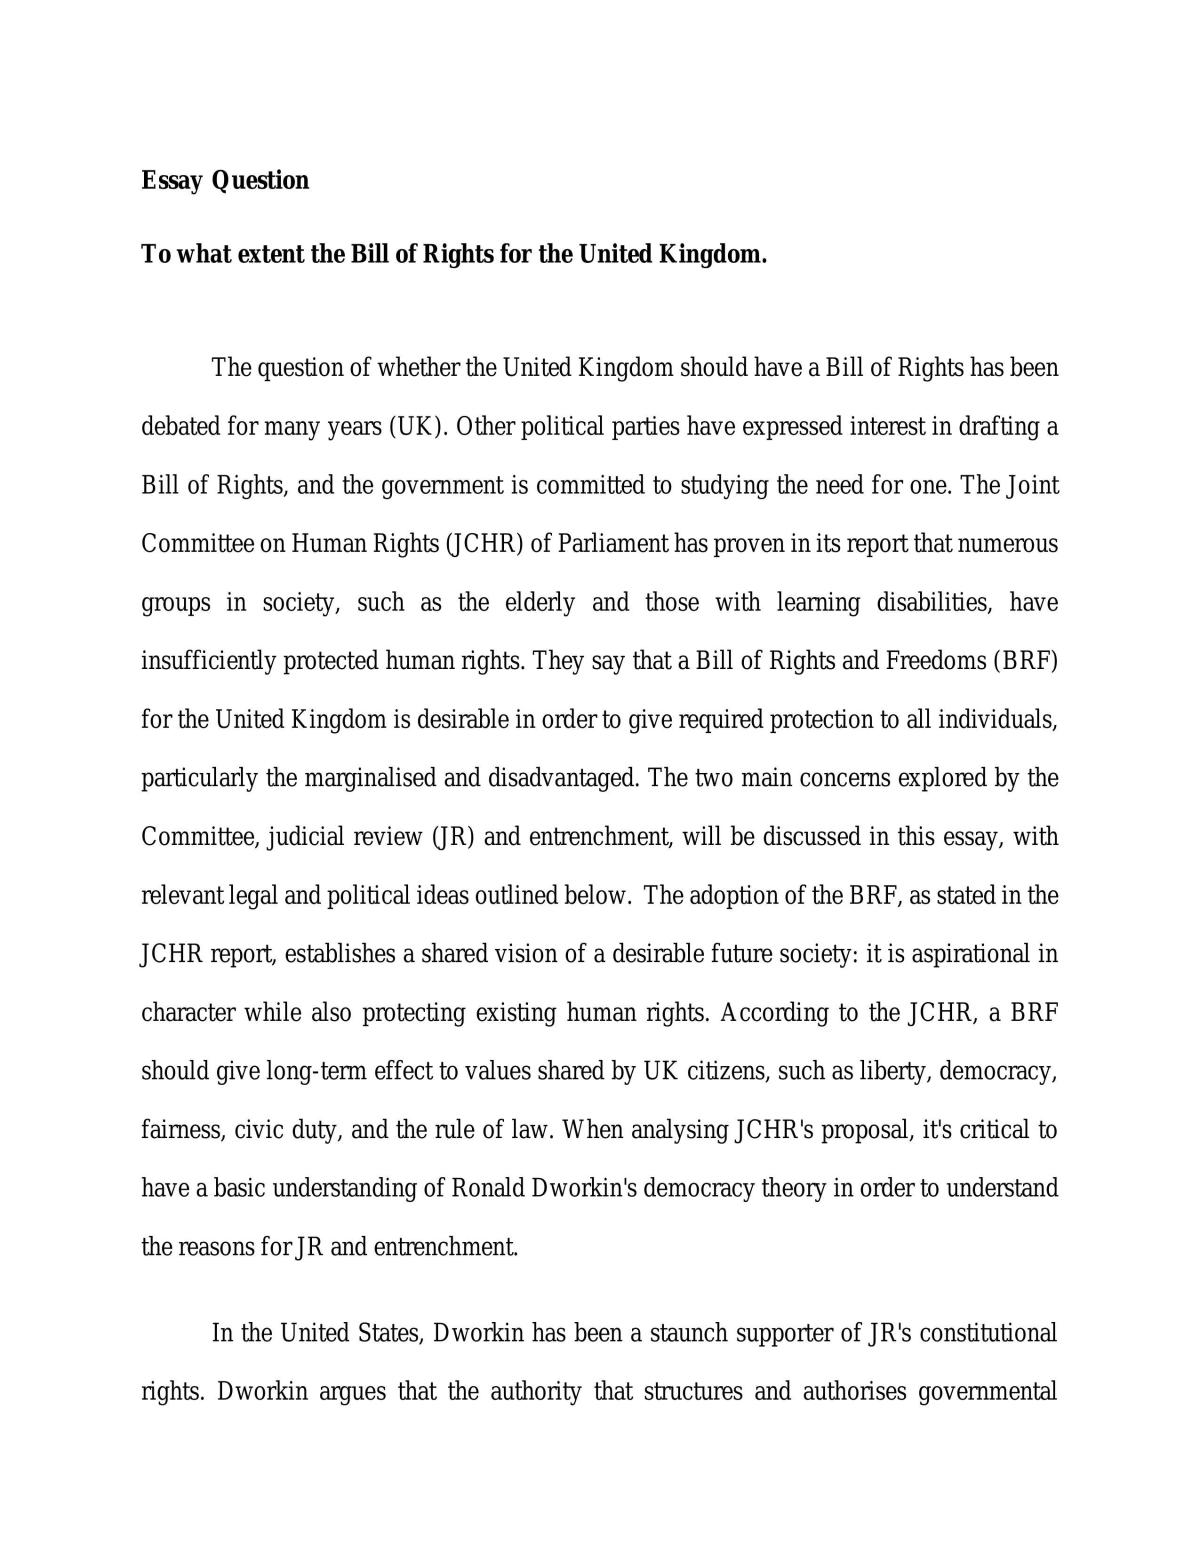 Bill of right for the UK - Page 1